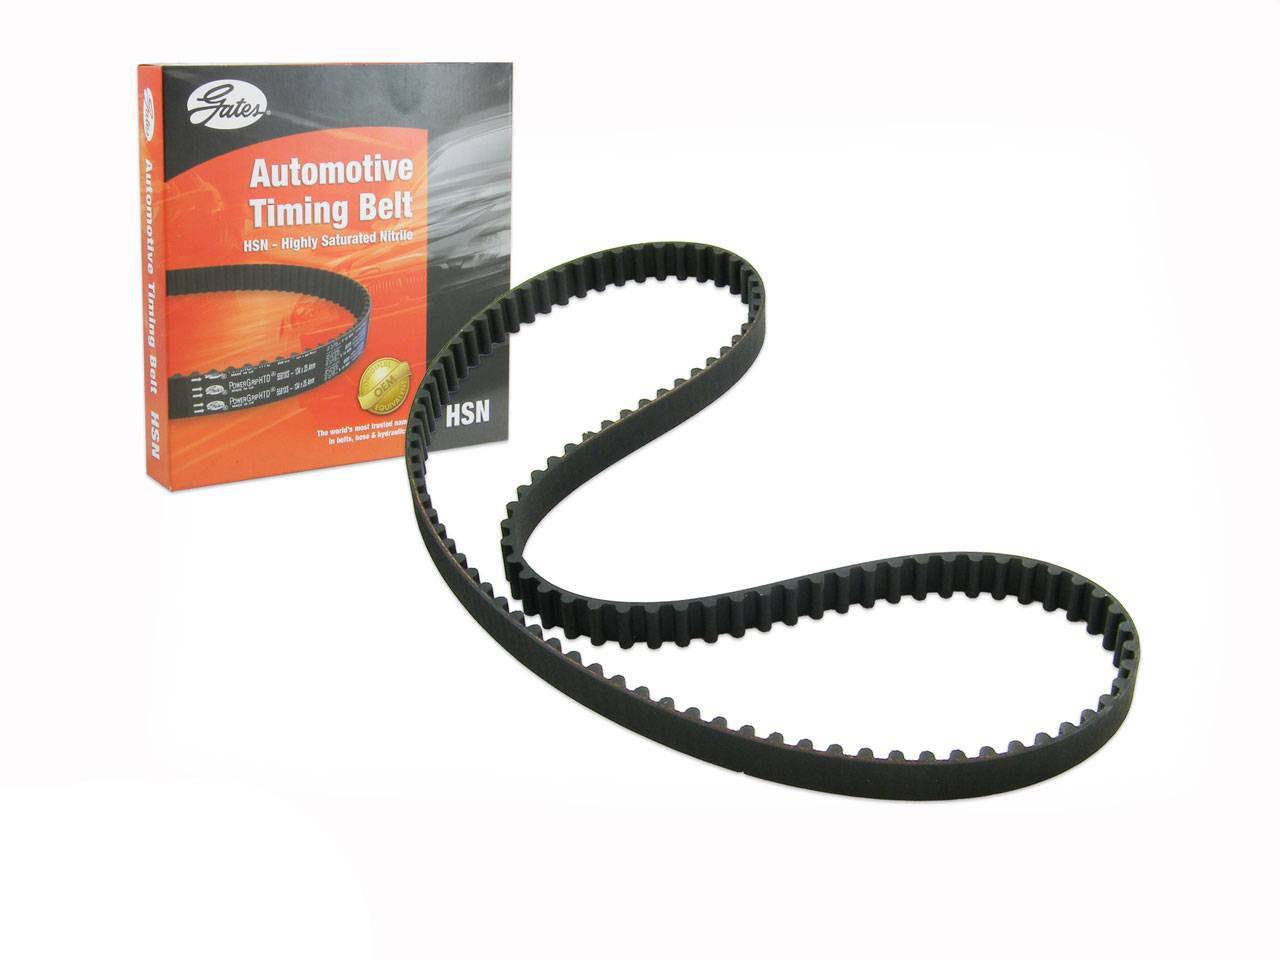 Timing Belt suits Toyota 4 Runner, Hiace, Hilux, Dyna, Diesel - Gates